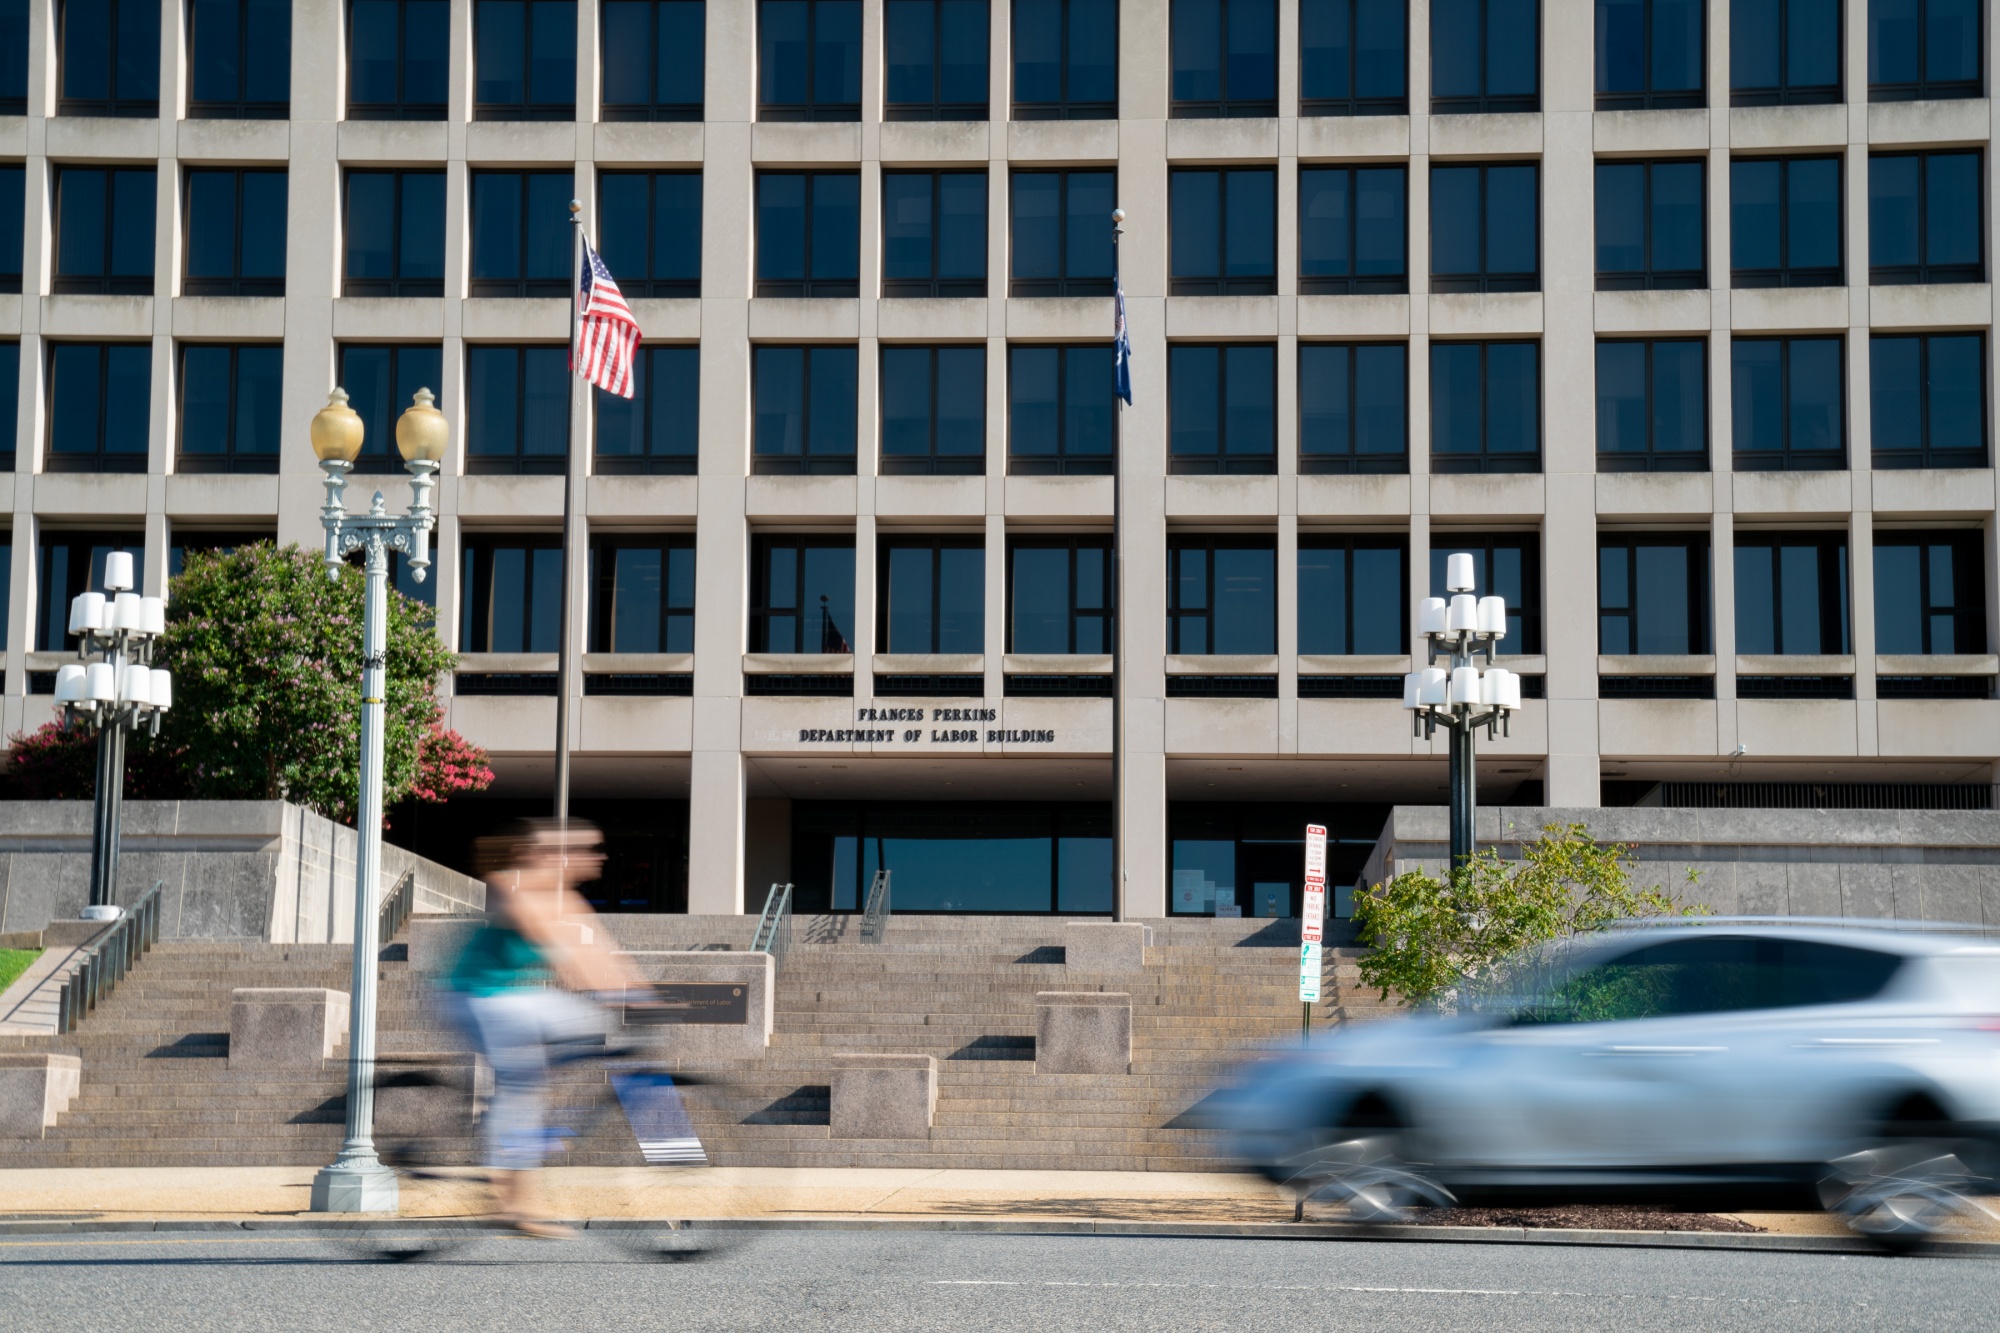 A cyclist rides past the U.S. Department building in Washington.